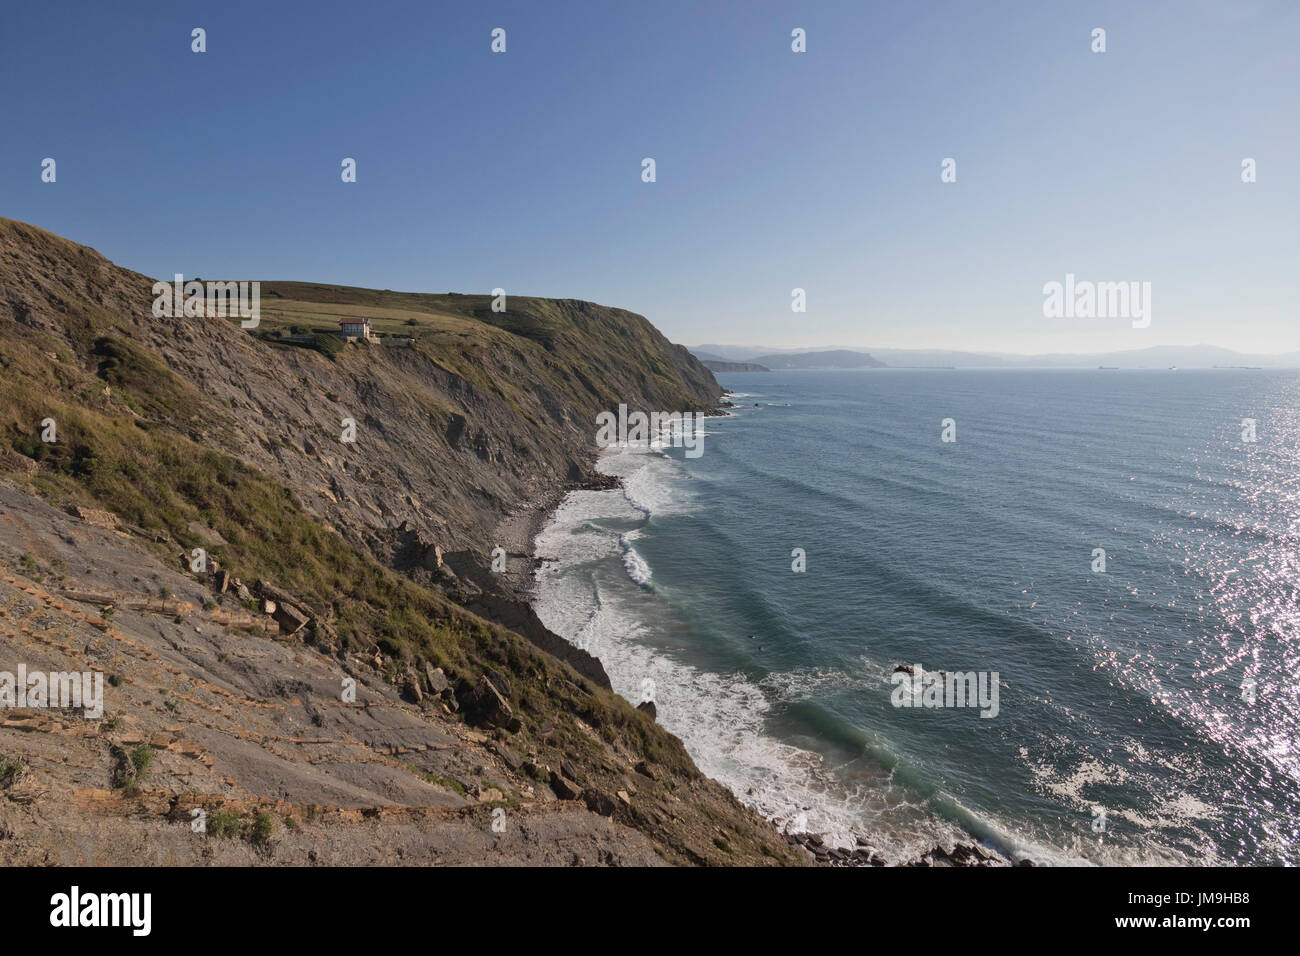 Wide angle view of Barrika cliff with a house at the edge (Bizkaia, Euskadi, Spain). Stock Photo